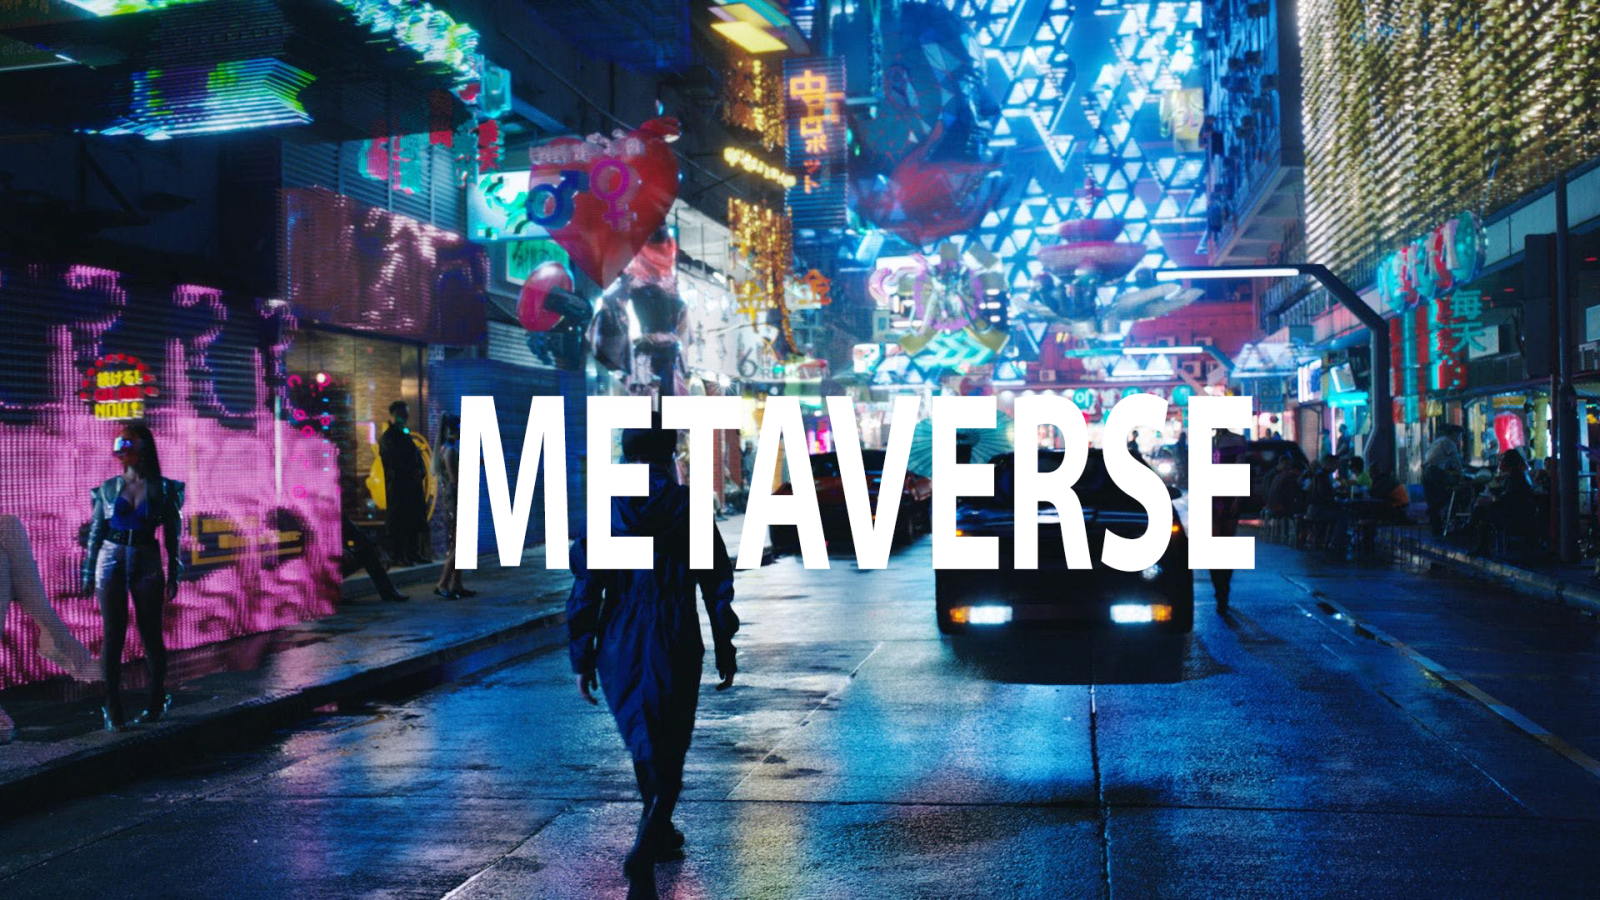 Metaverse: Your Guide to the New World - Eklipse.gg Blog